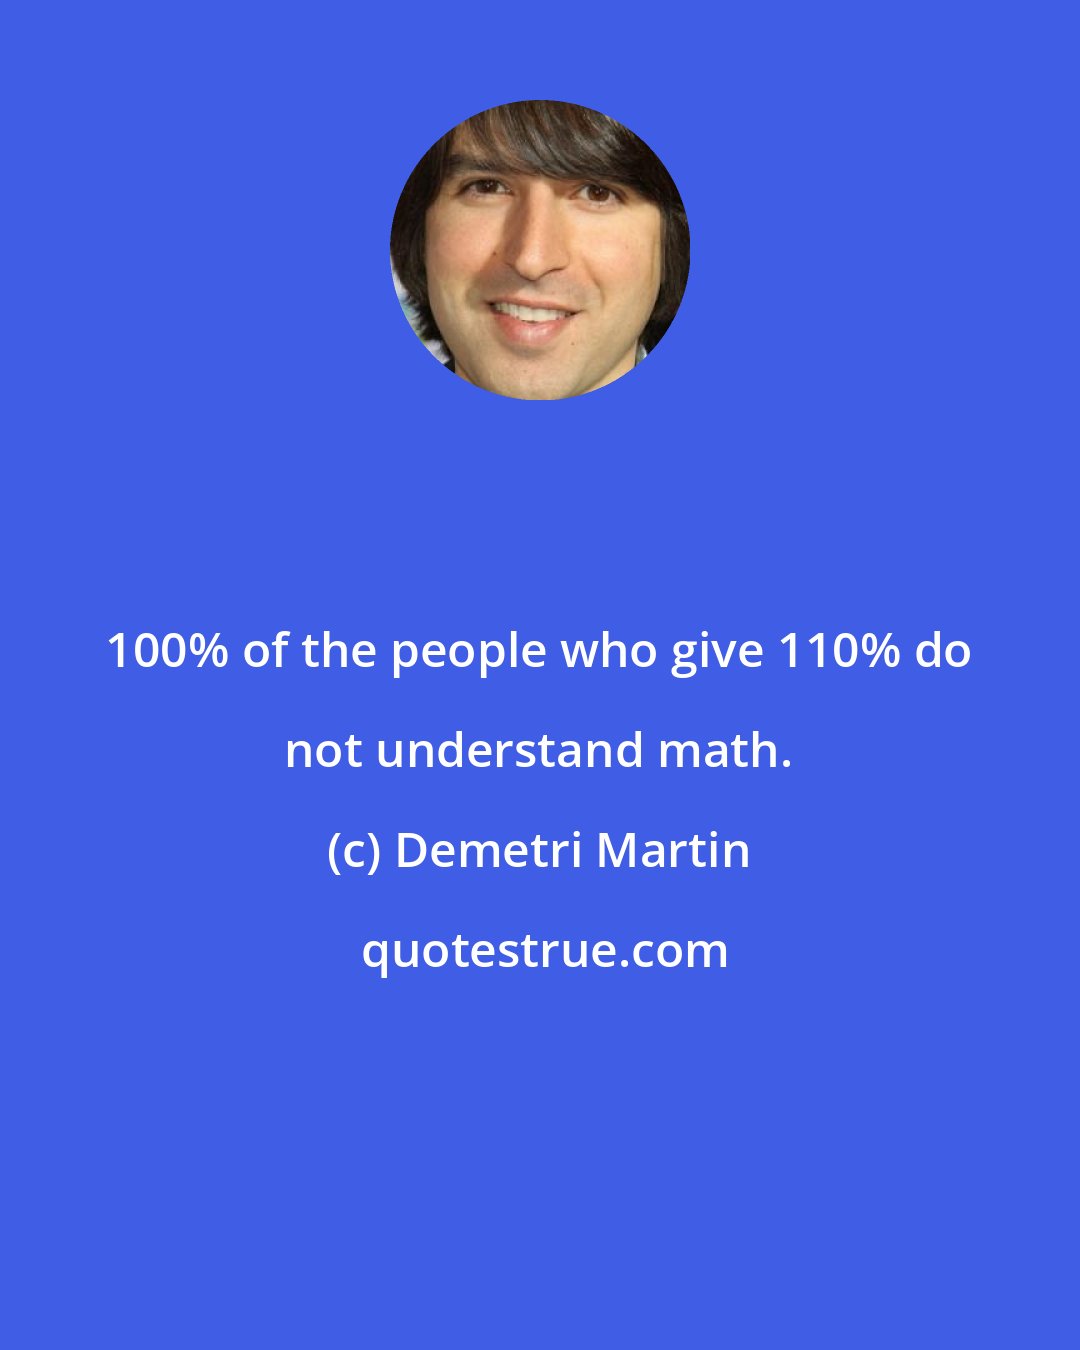 Demetri Martin: 100% of the people who give 110% do not understand math.